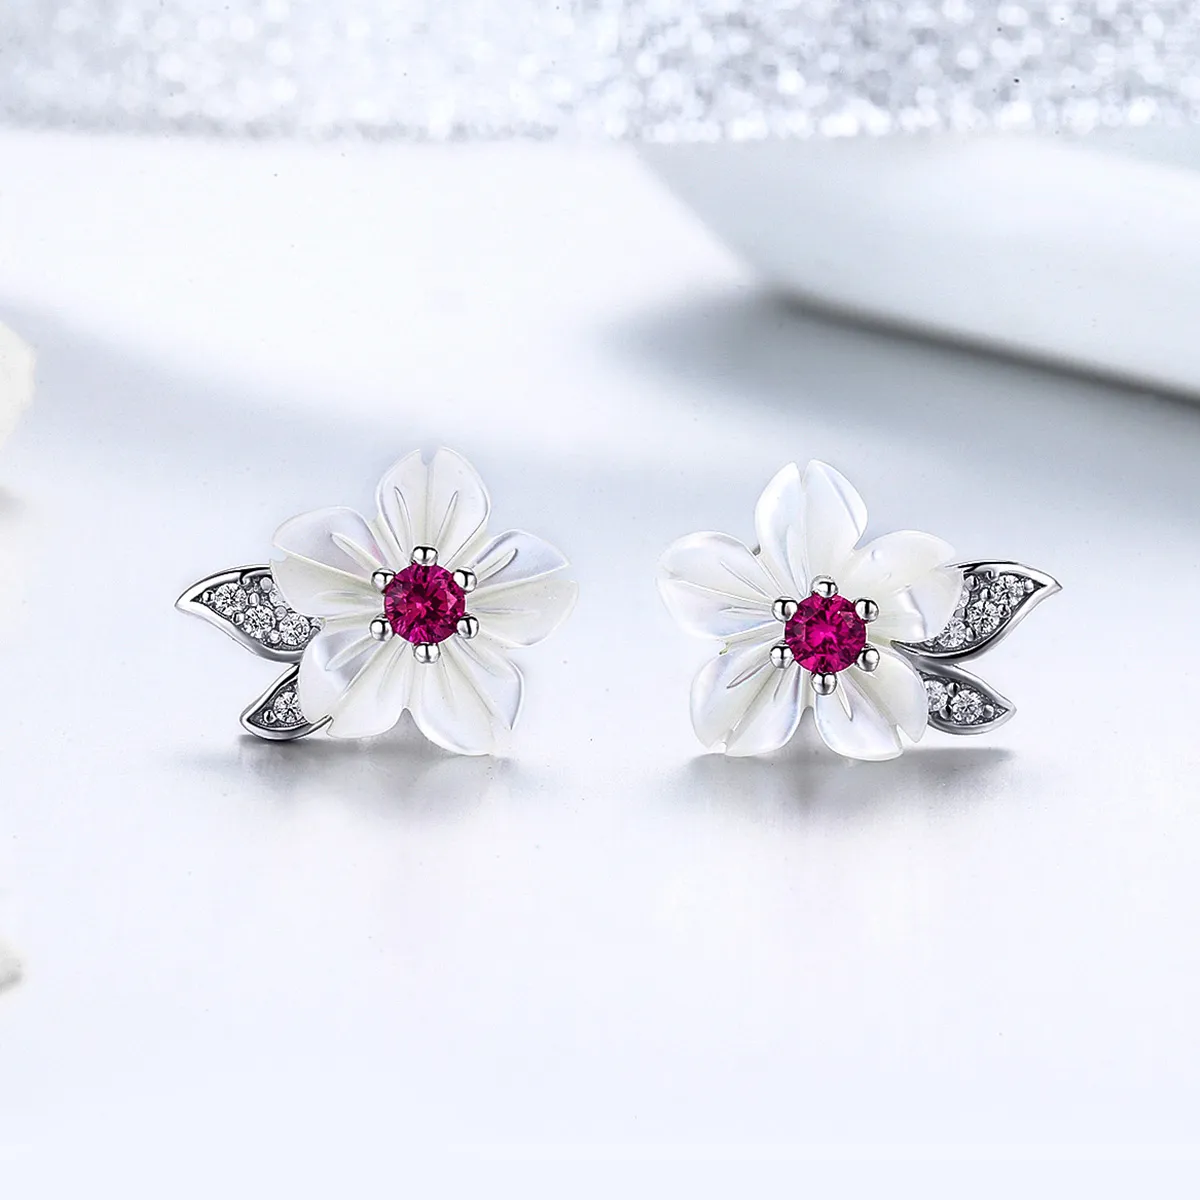 Pandora Style Silver Cherry Blossom Stud Earrings - BSE055